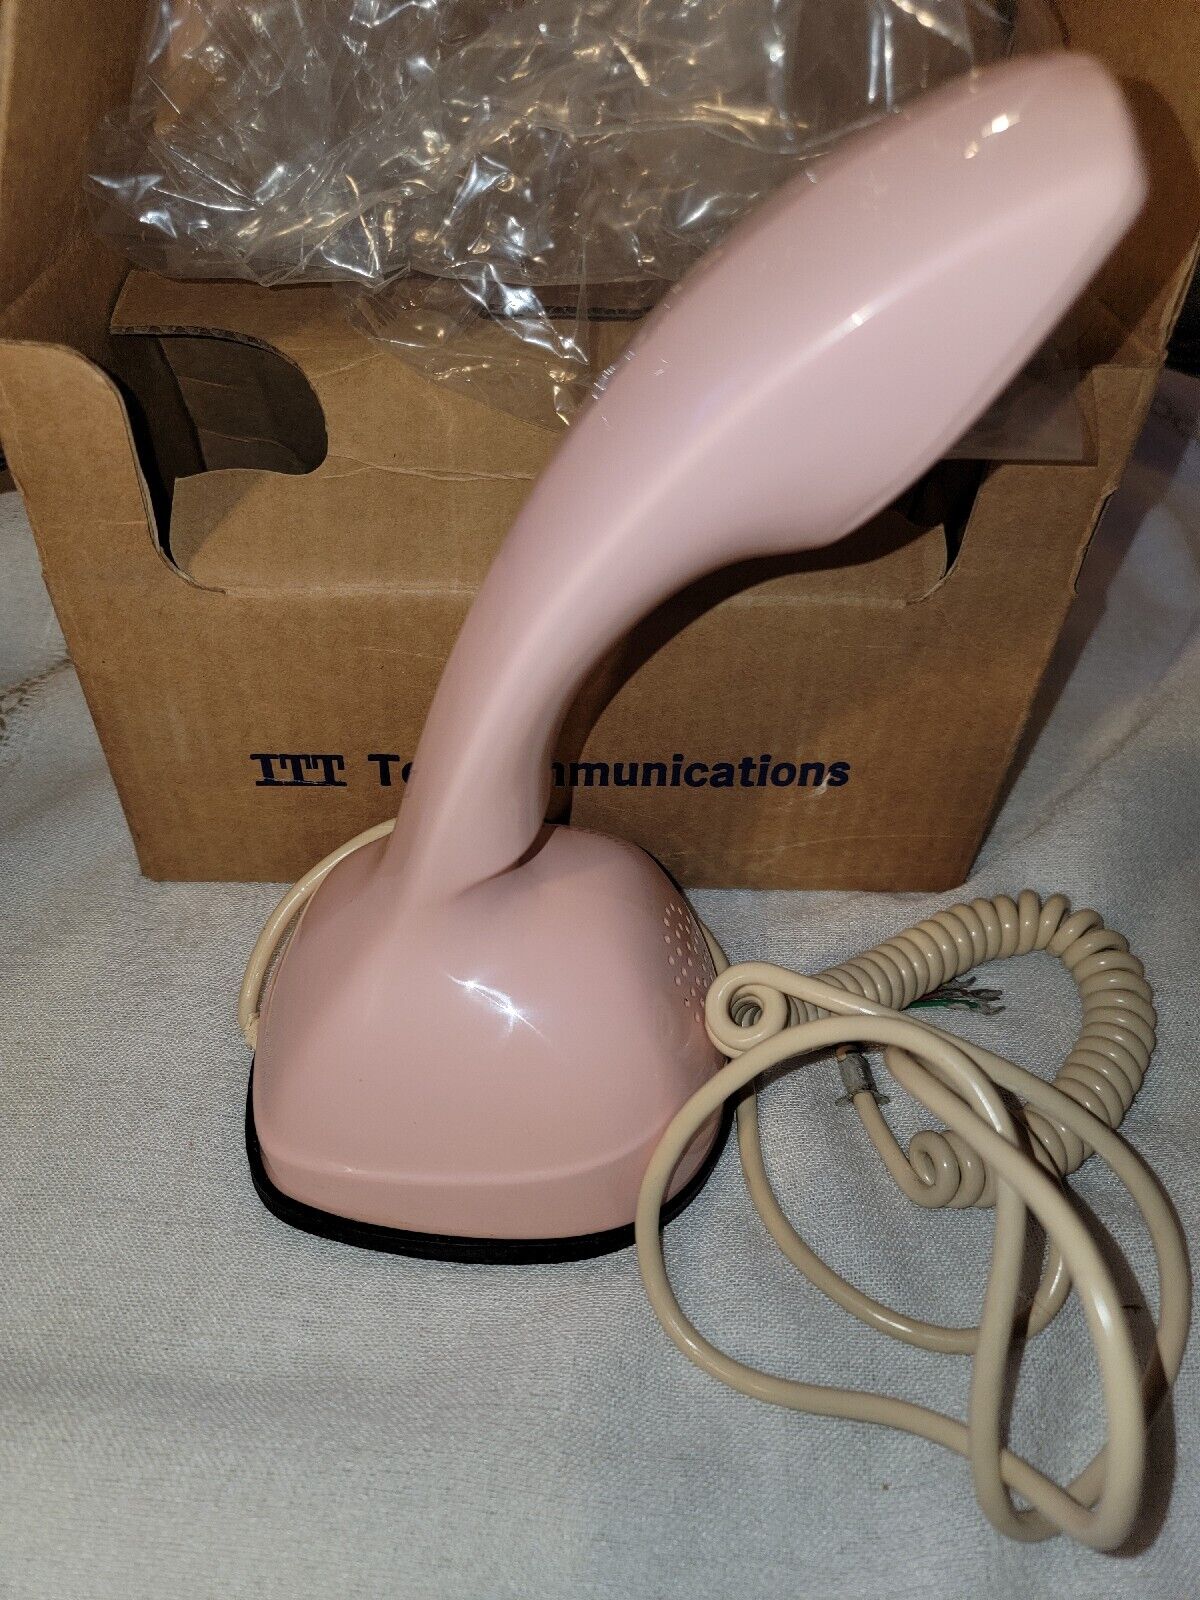 VINTAGE ERICOFON ROTARY DIAL TELEPHONE NORTH ELECTRIC CO NEW OLD STOCK PINK